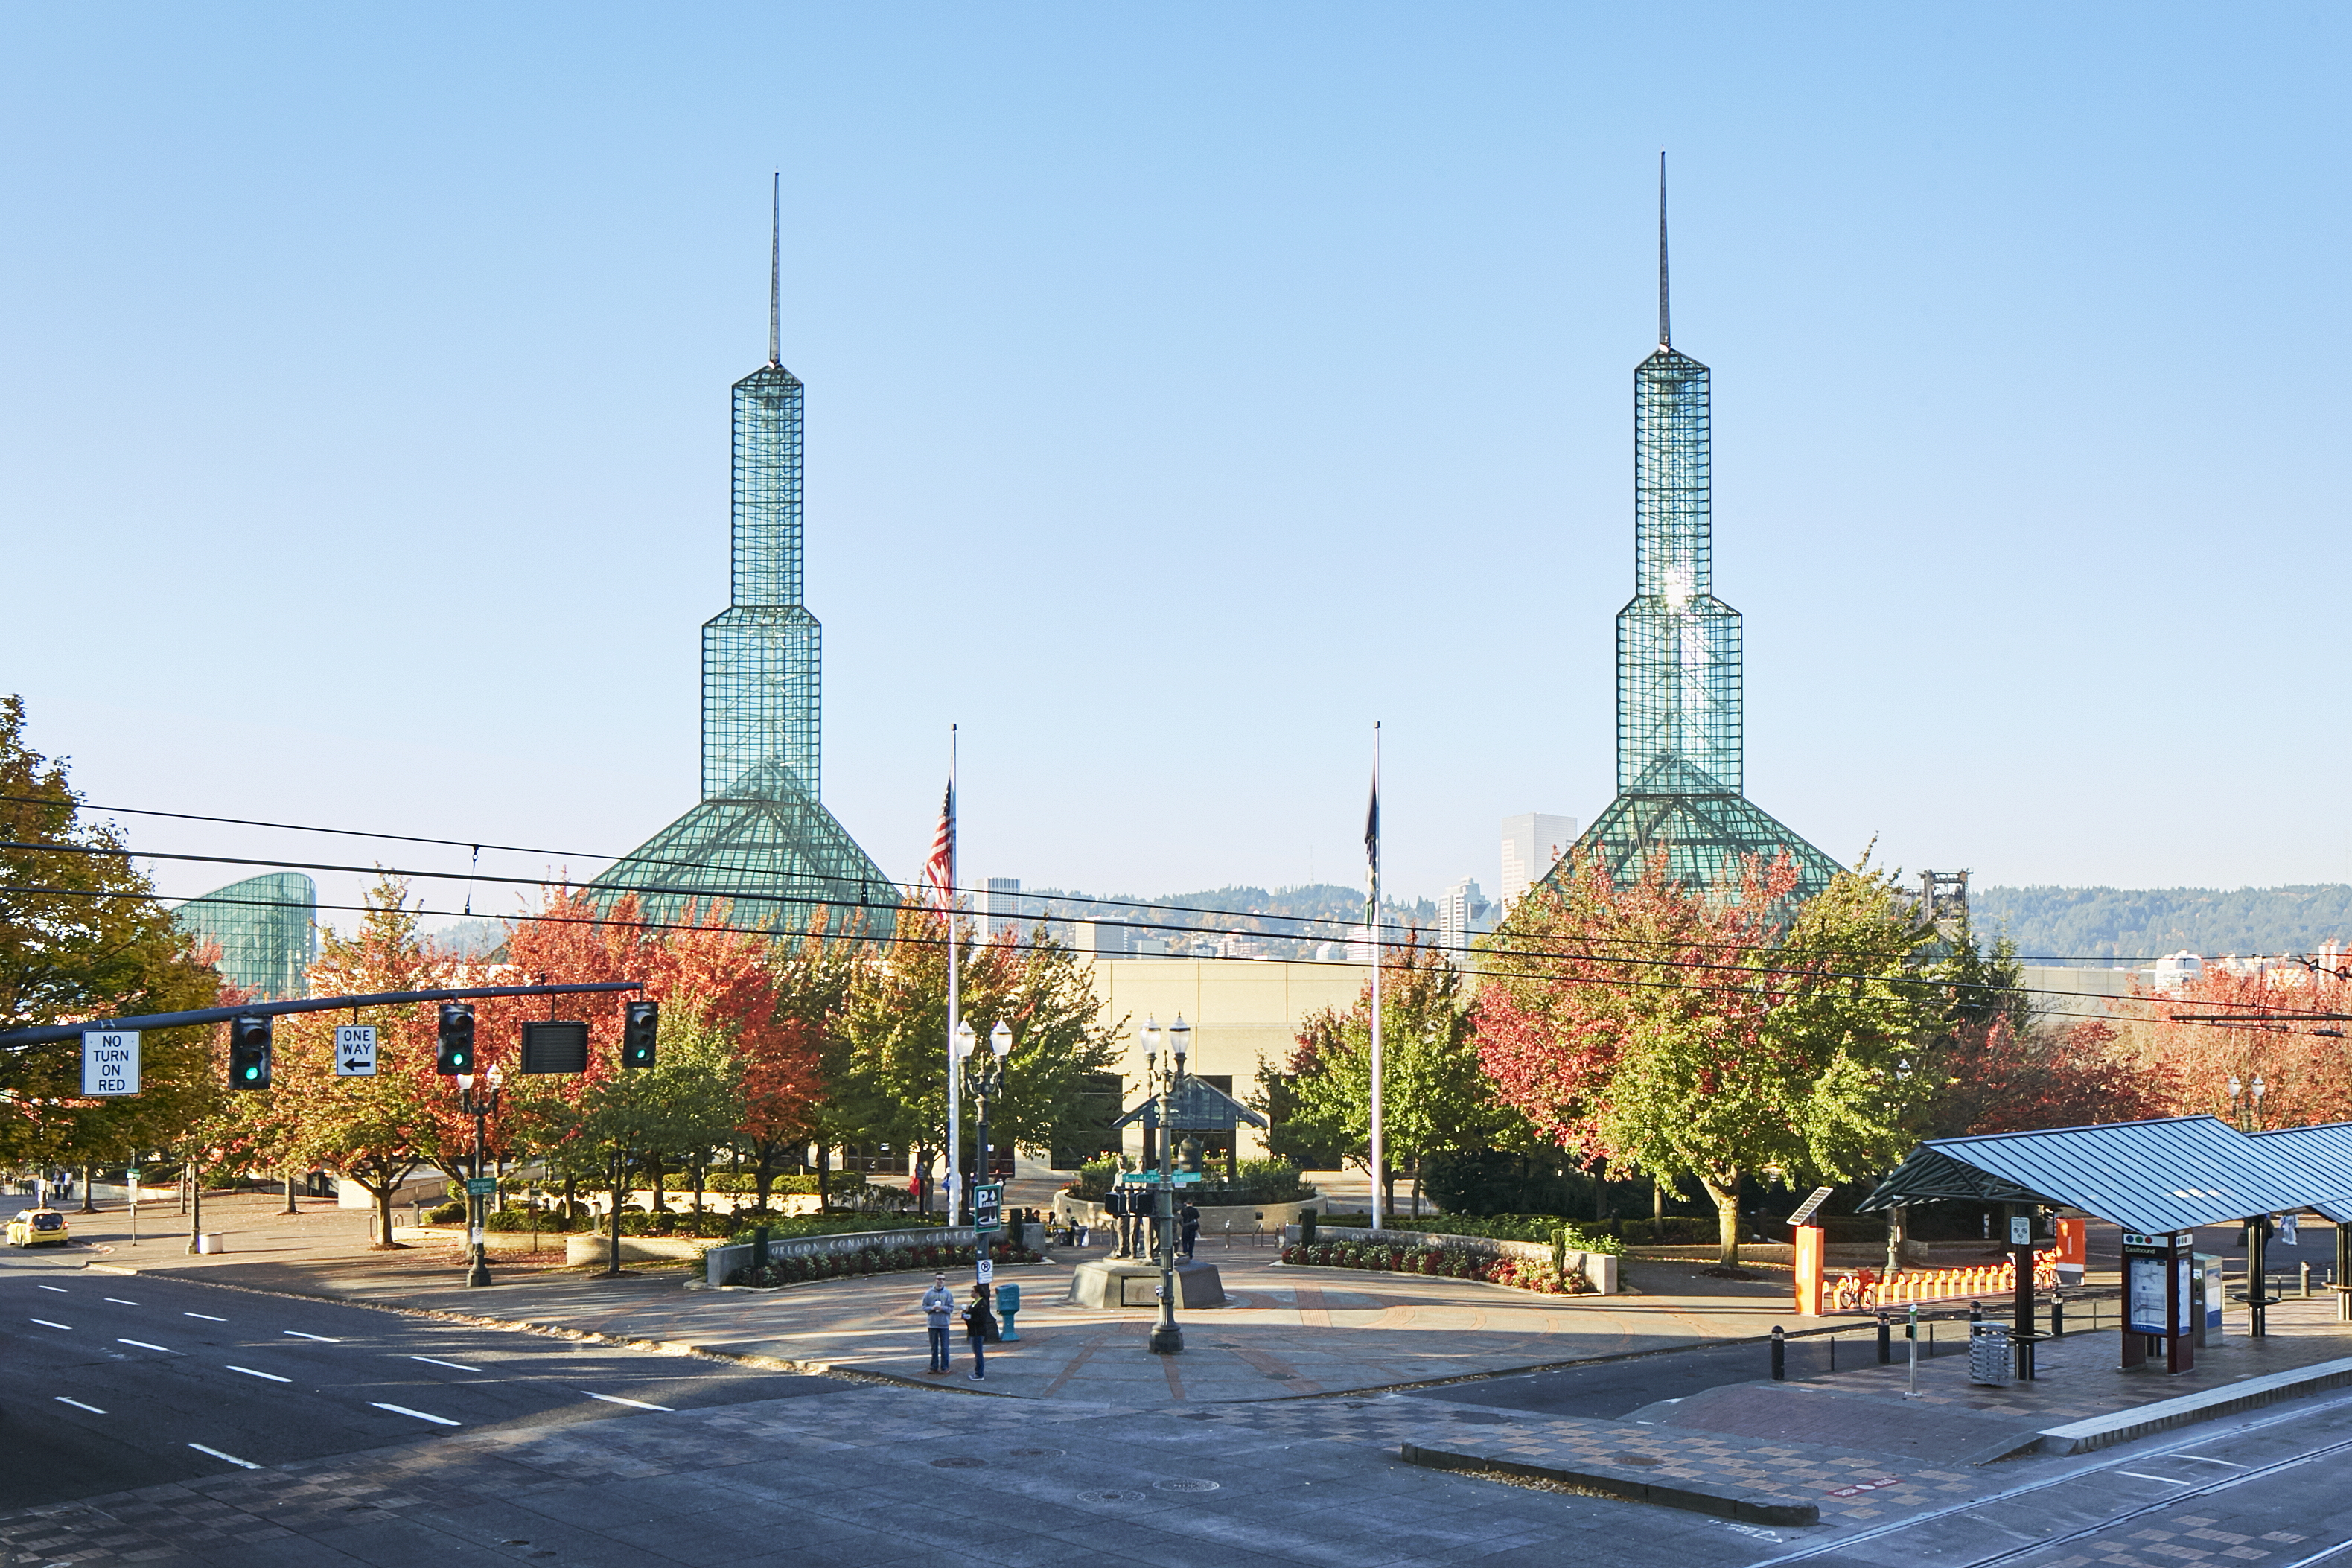 The two glass towers of the Oregon Convention Center in Portland.